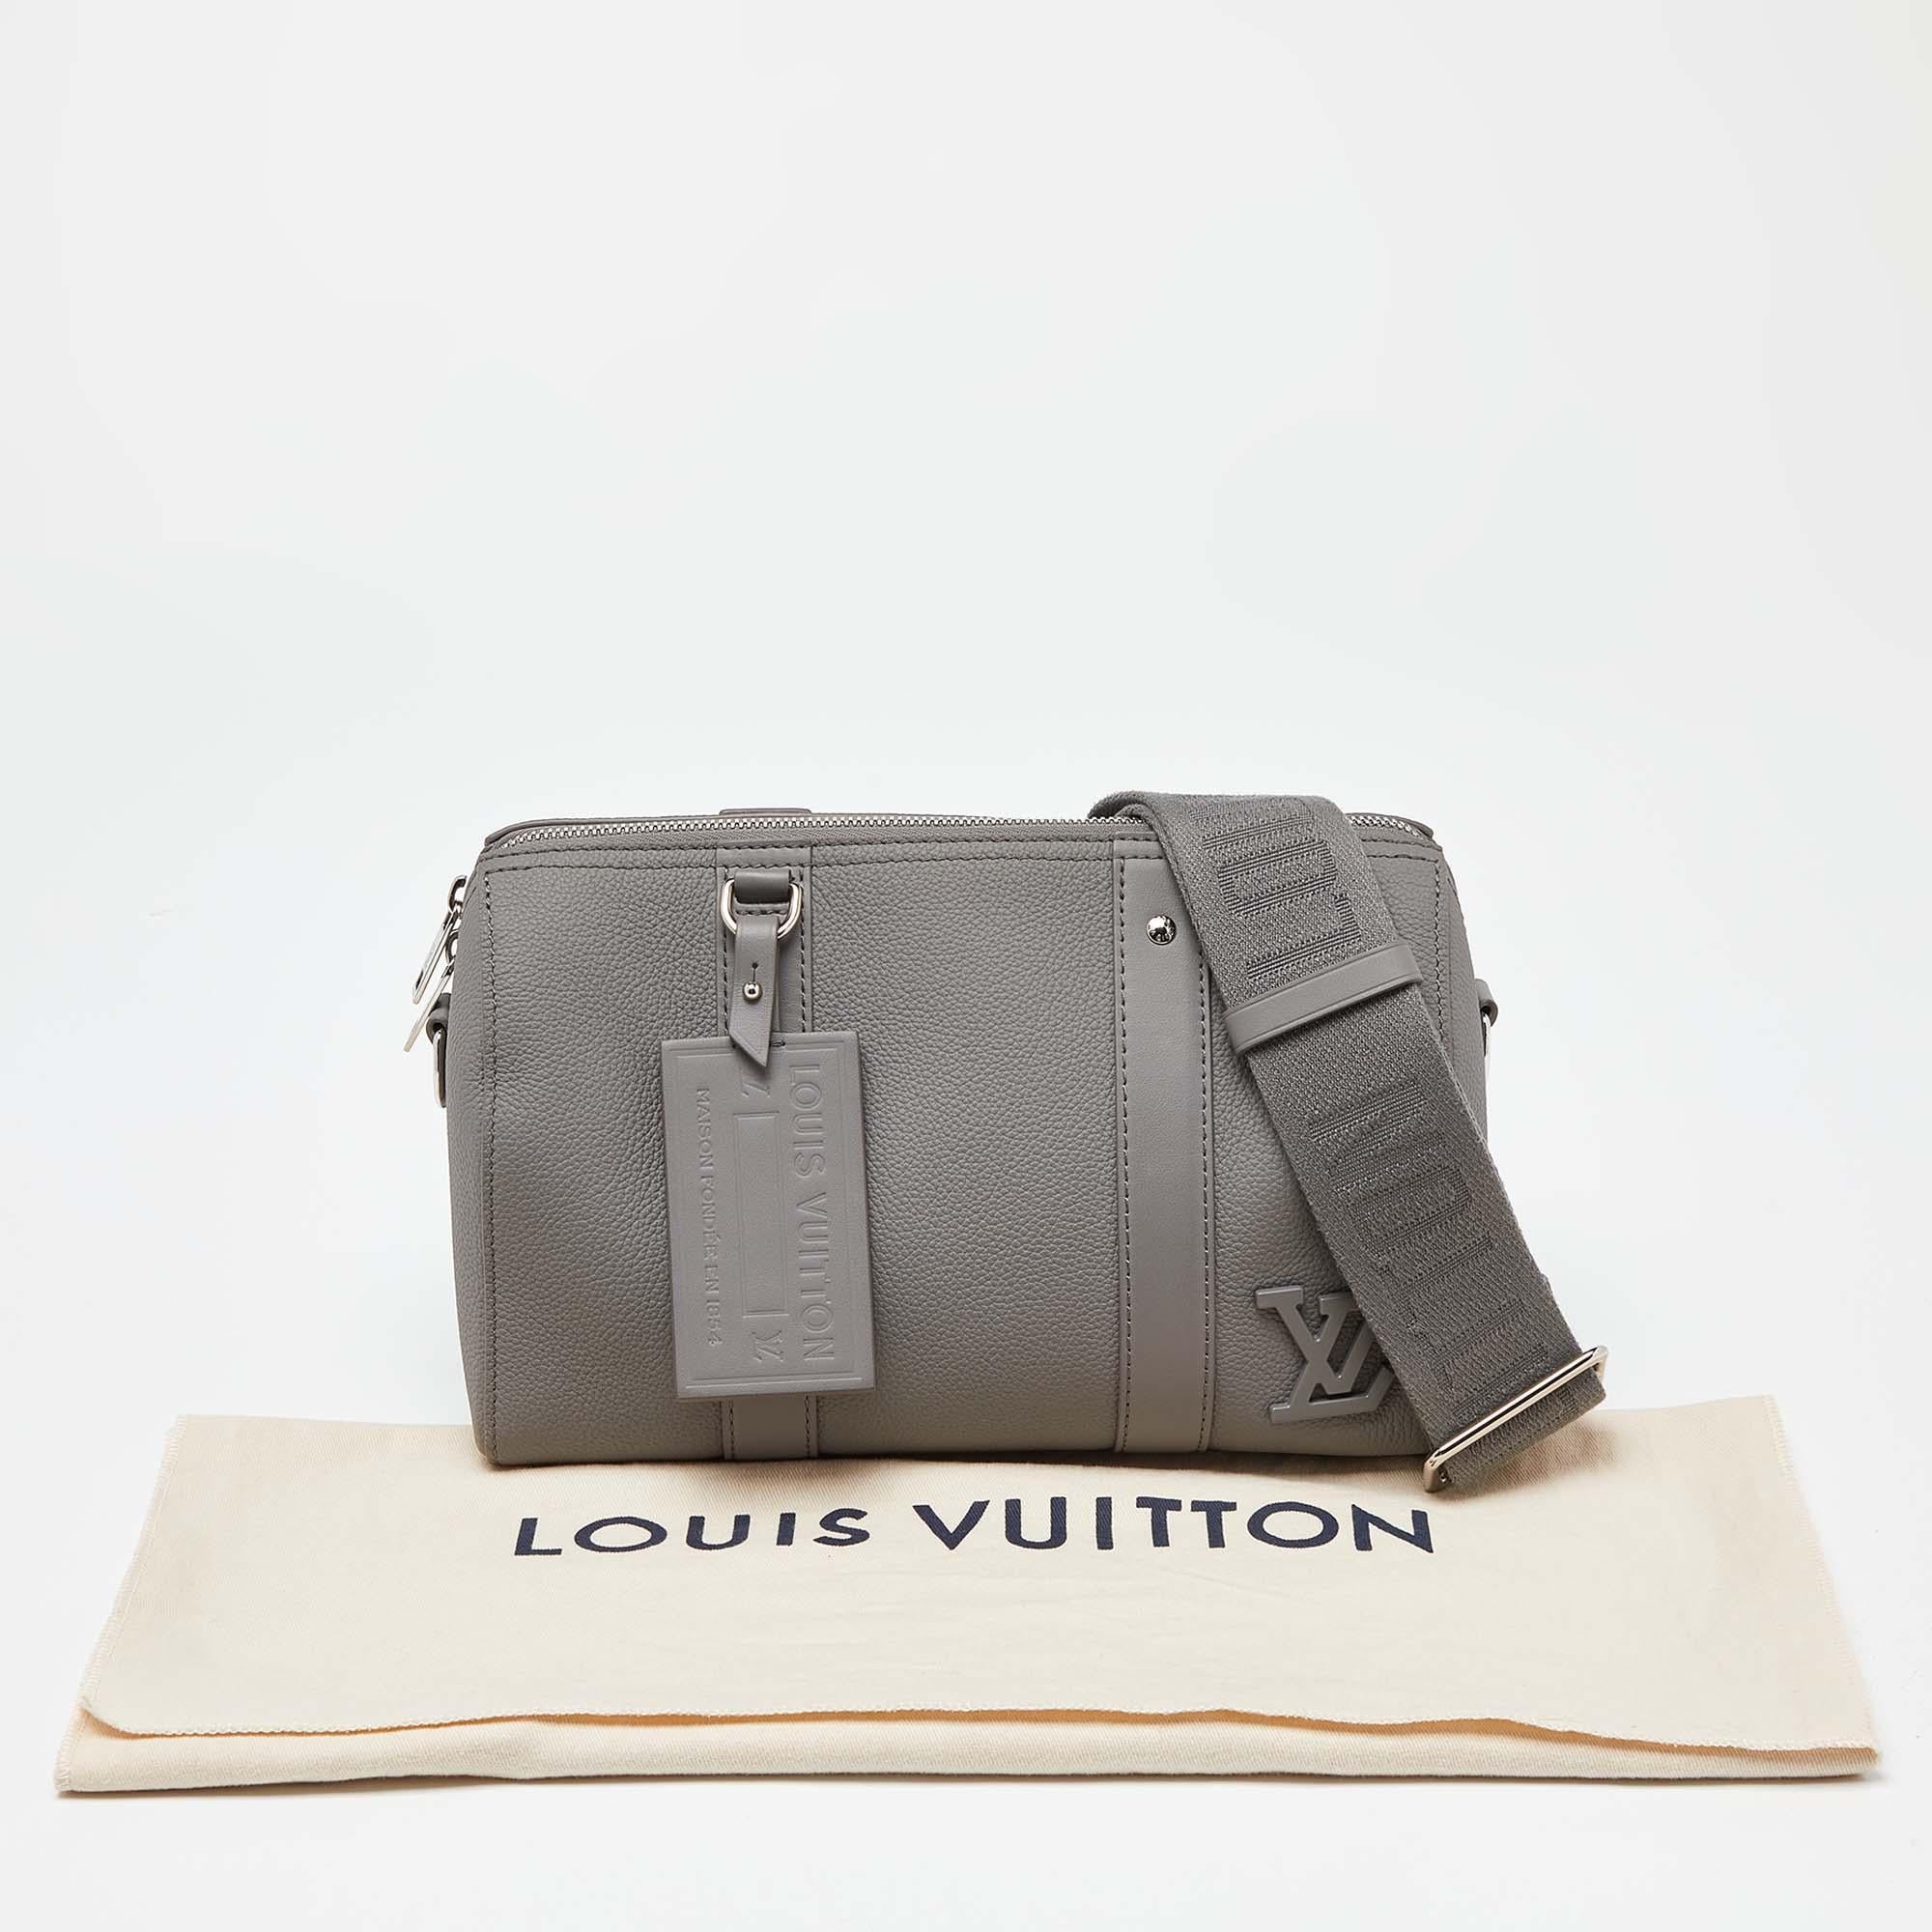 Louis Vuitton Grey Leather City Keepall Bag For Sale 8